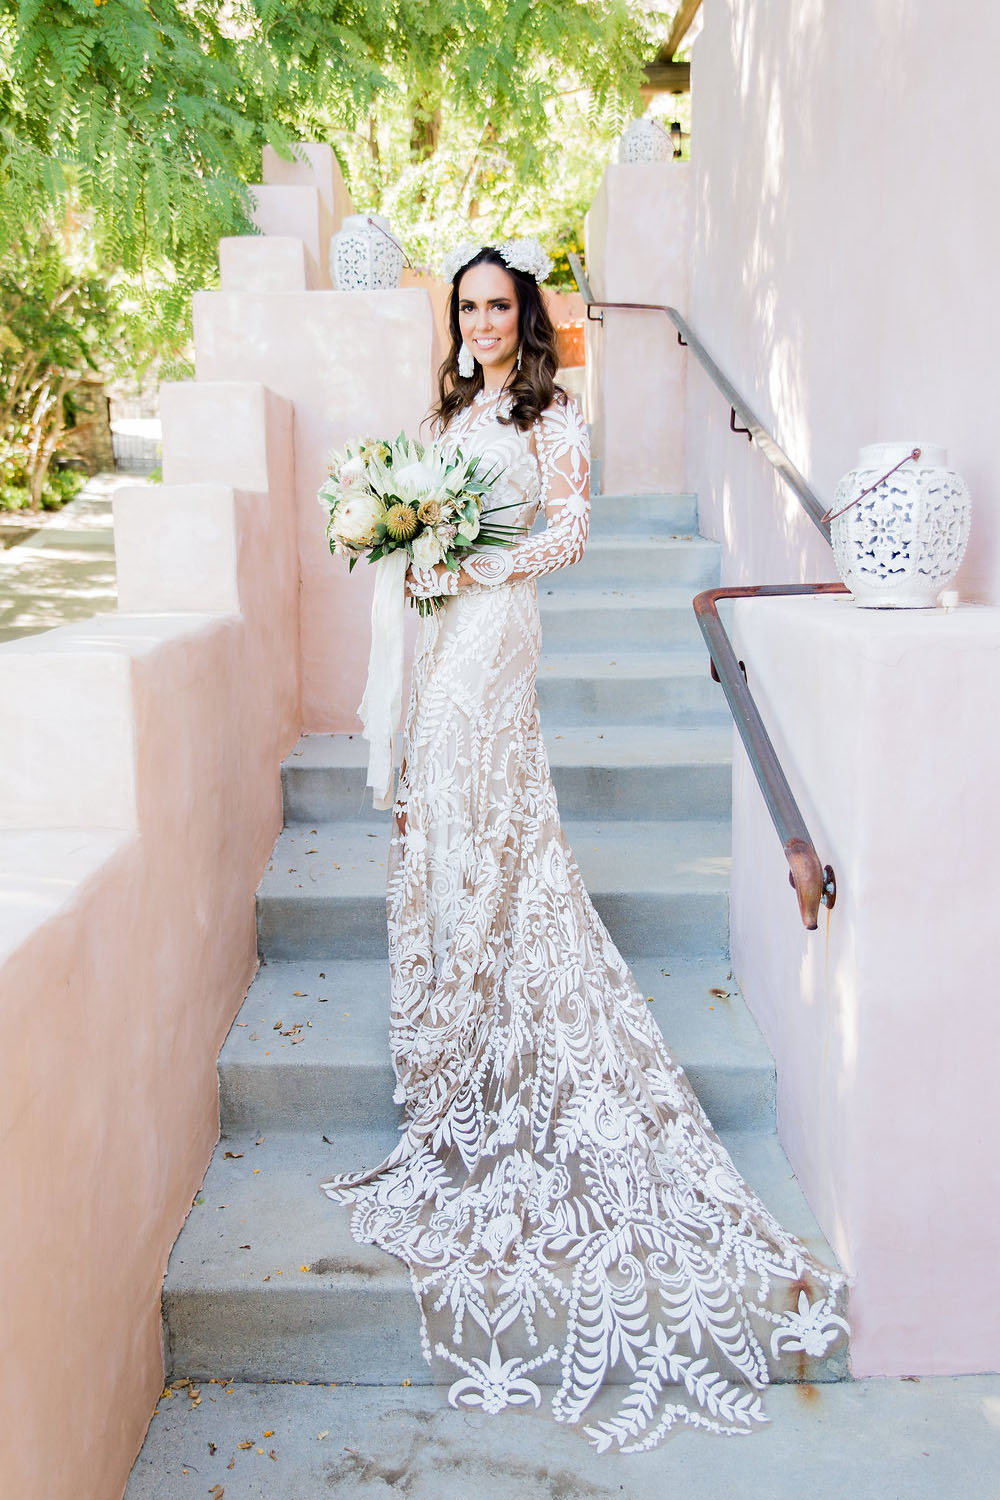 The bride was wearing a boho wedding gown with large lace appliques and illusion parts and completed the look with statement earrings and a crown